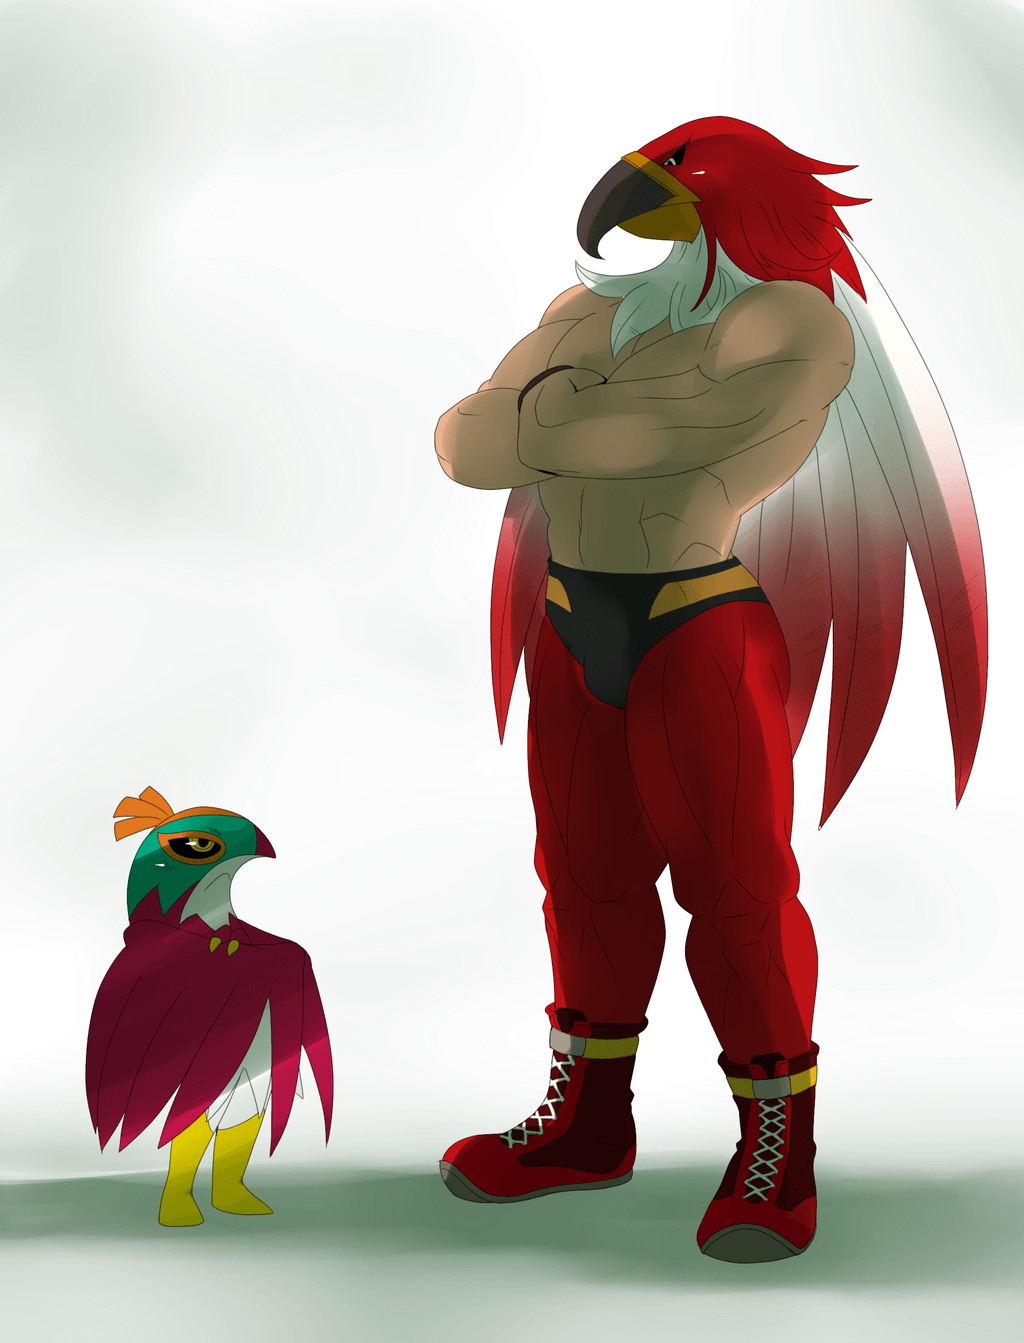 Hawlucha from Pokemon and Tizoc from King of Fighters. Pokémon